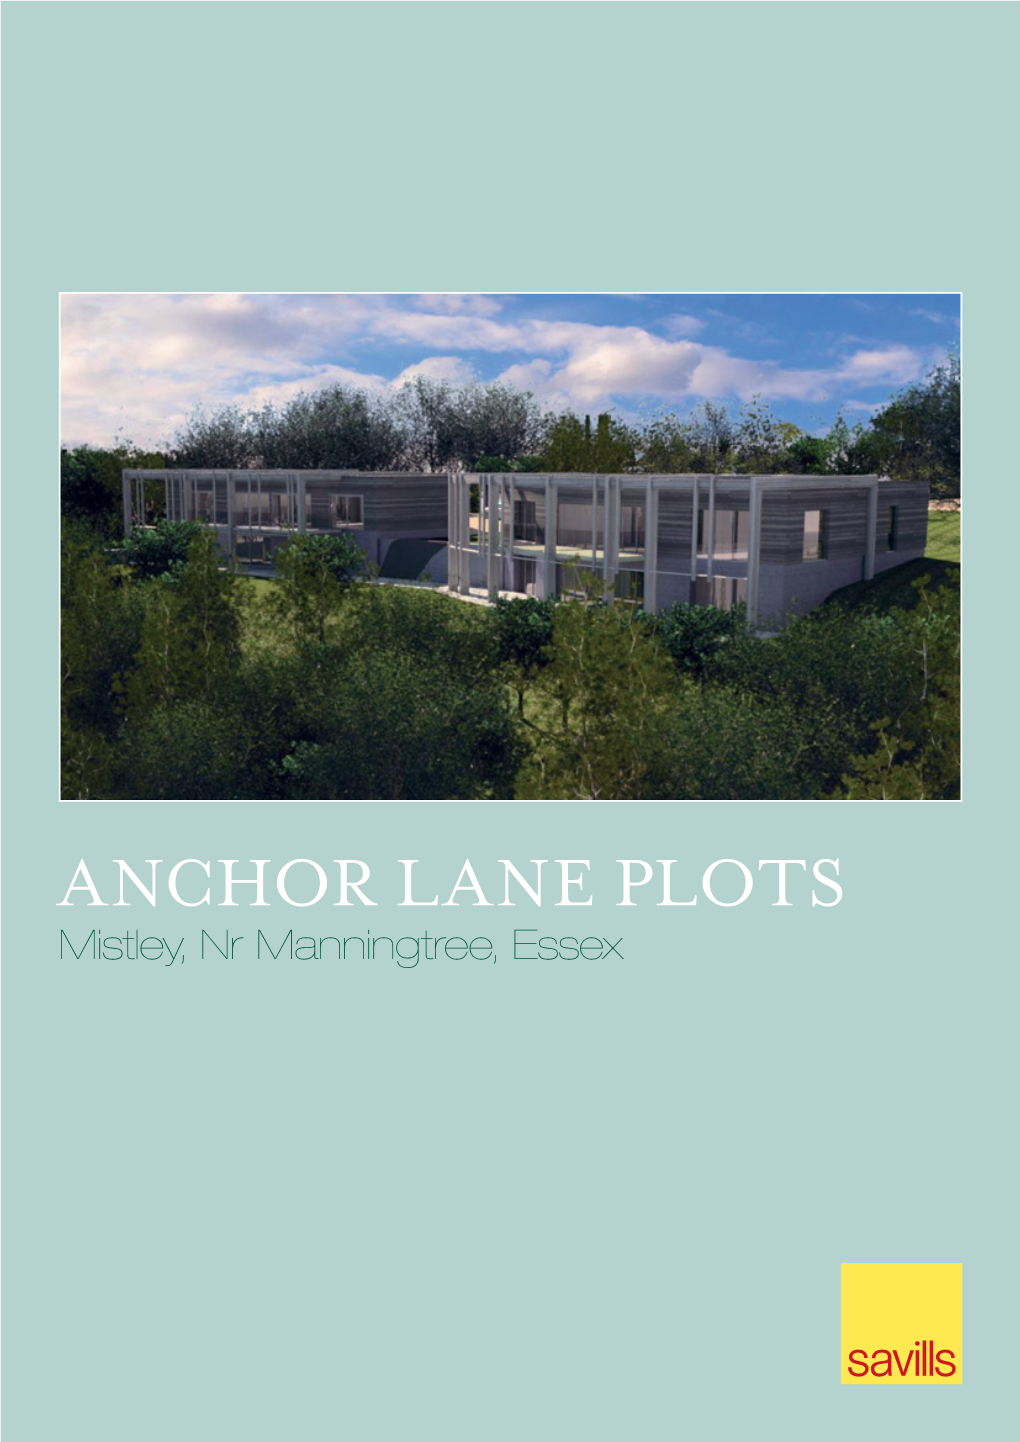 Anchor Lane Plots Mistley, Nr Manningtree, Essex One of the Finest Positions to Create Two Grand Design Type Properties Enjoying Panoramic Views Over the River Stour